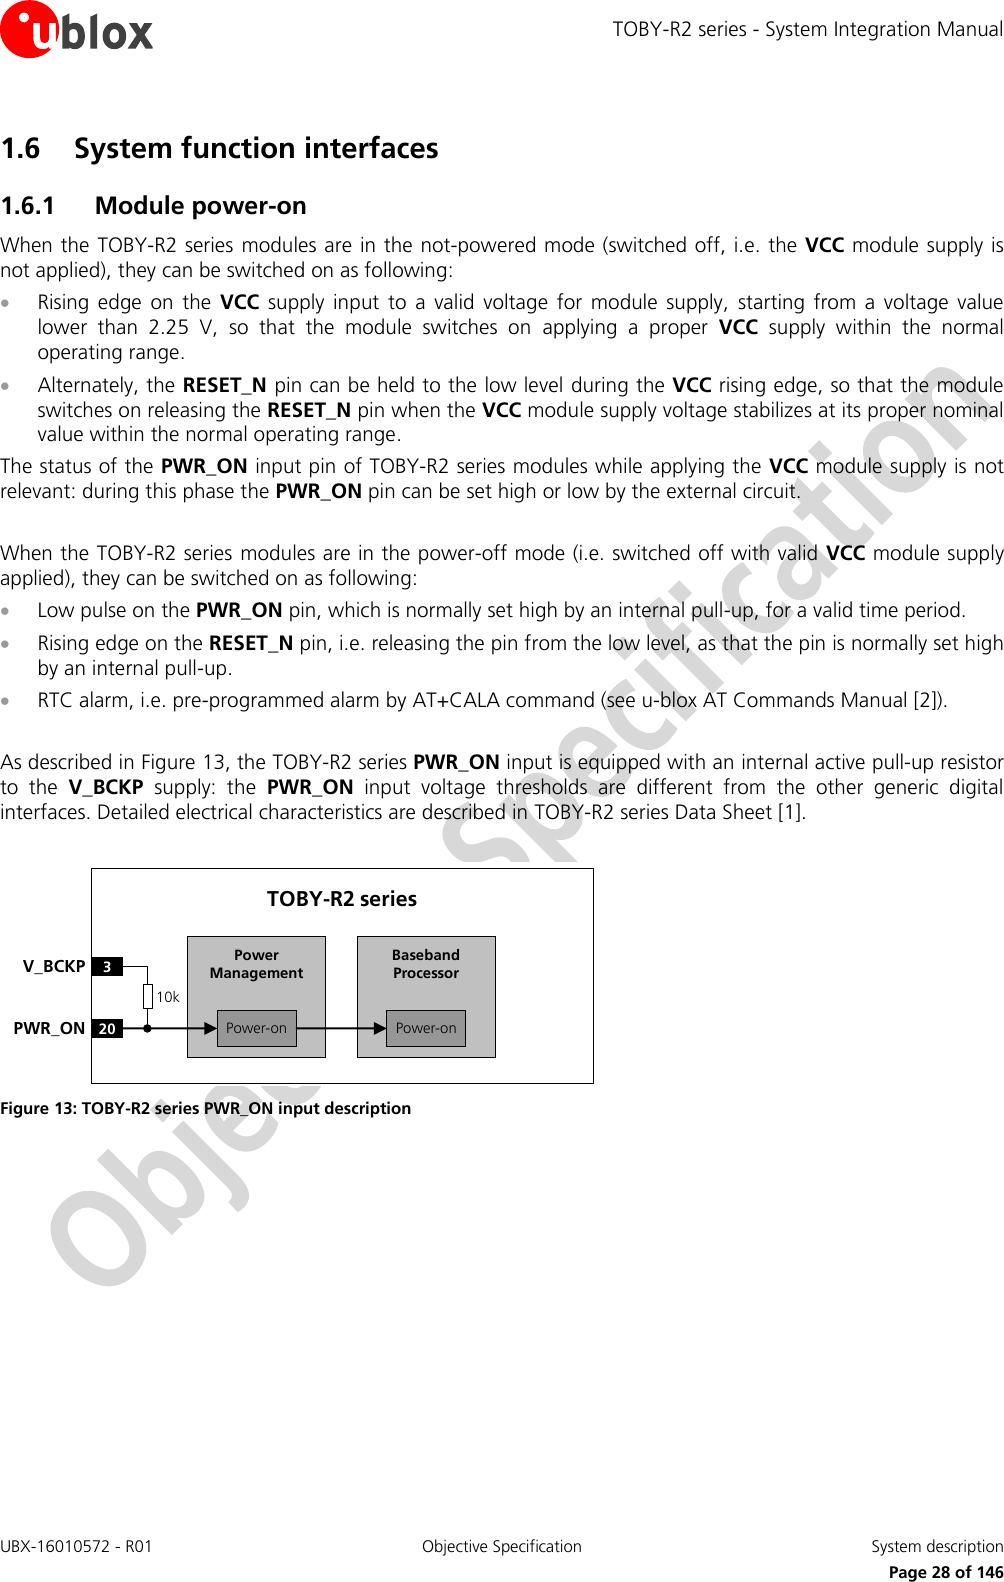 TOBY-R2 series - System Integration Manual UBX-16010572 - R01  Objective Specification  System description     Page 28 of 146 1.6 System function interfaces 1.6.1 Module power-on When the TOBY-R2 series modules are in the not-powered mode (switched off, i.e. the VCC module supply is not applied), they can be switched on as following:  Rising  edge  on  the  VCC  supply  input  to  a  valid  voltage  for module  supply,  starting  from  a  voltage  value lower  than  2.25  V,  so  that  the  module  switches  on  applying  a  proper  VCC  supply  within  the  normal operating range.  Alternately, the RESET_N pin can be held to the low level during the VCC rising edge, so that the module switches on releasing the RESET_N pin when the VCC module supply voltage stabilizes at its proper nominal value within the normal operating range. The status of the PWR_ON input pin of TOBY-R2 series modules while applying the VCC module supply is not relevant: during this phase the PWR_ON pin can be set high or low by the external circuit.  When the TOBY-R2 series modules are in the power-off mode (i.e. switched off with valid VCC module supply applied), they can be switched on as following:  Low pulse on the PWR_ON pin, which is normally set high by an internal pull-up, for a valid time period.  Rising edge on the RESET_N pin, i.e. releasing the pin from the low level, as that the pin is normally set high by an internal pull-up.  RTC alarm, i.e. pre-programmed alarm by AT+CALA command (see u-blox AT Commands Manual [2]).  As described in Figure 13, the TOBY-R2 series PWR_ON input is equipped with an internal active pull-up resistor to  the  V_BCKP  supply:  the  PWR_ON  input  voltage  thresholds  are  different  from  the  other  generic  digital interfaces. Detailed electrical characteristics are described in TOBY-R2 series Data Sheet [1].  Baseband Processor20PWR_ONTOBY-R2 series3V_BCKPPower-onPower ManagementPower-on10k Figure 13: TOBY-R2 series PWR_ON input description   